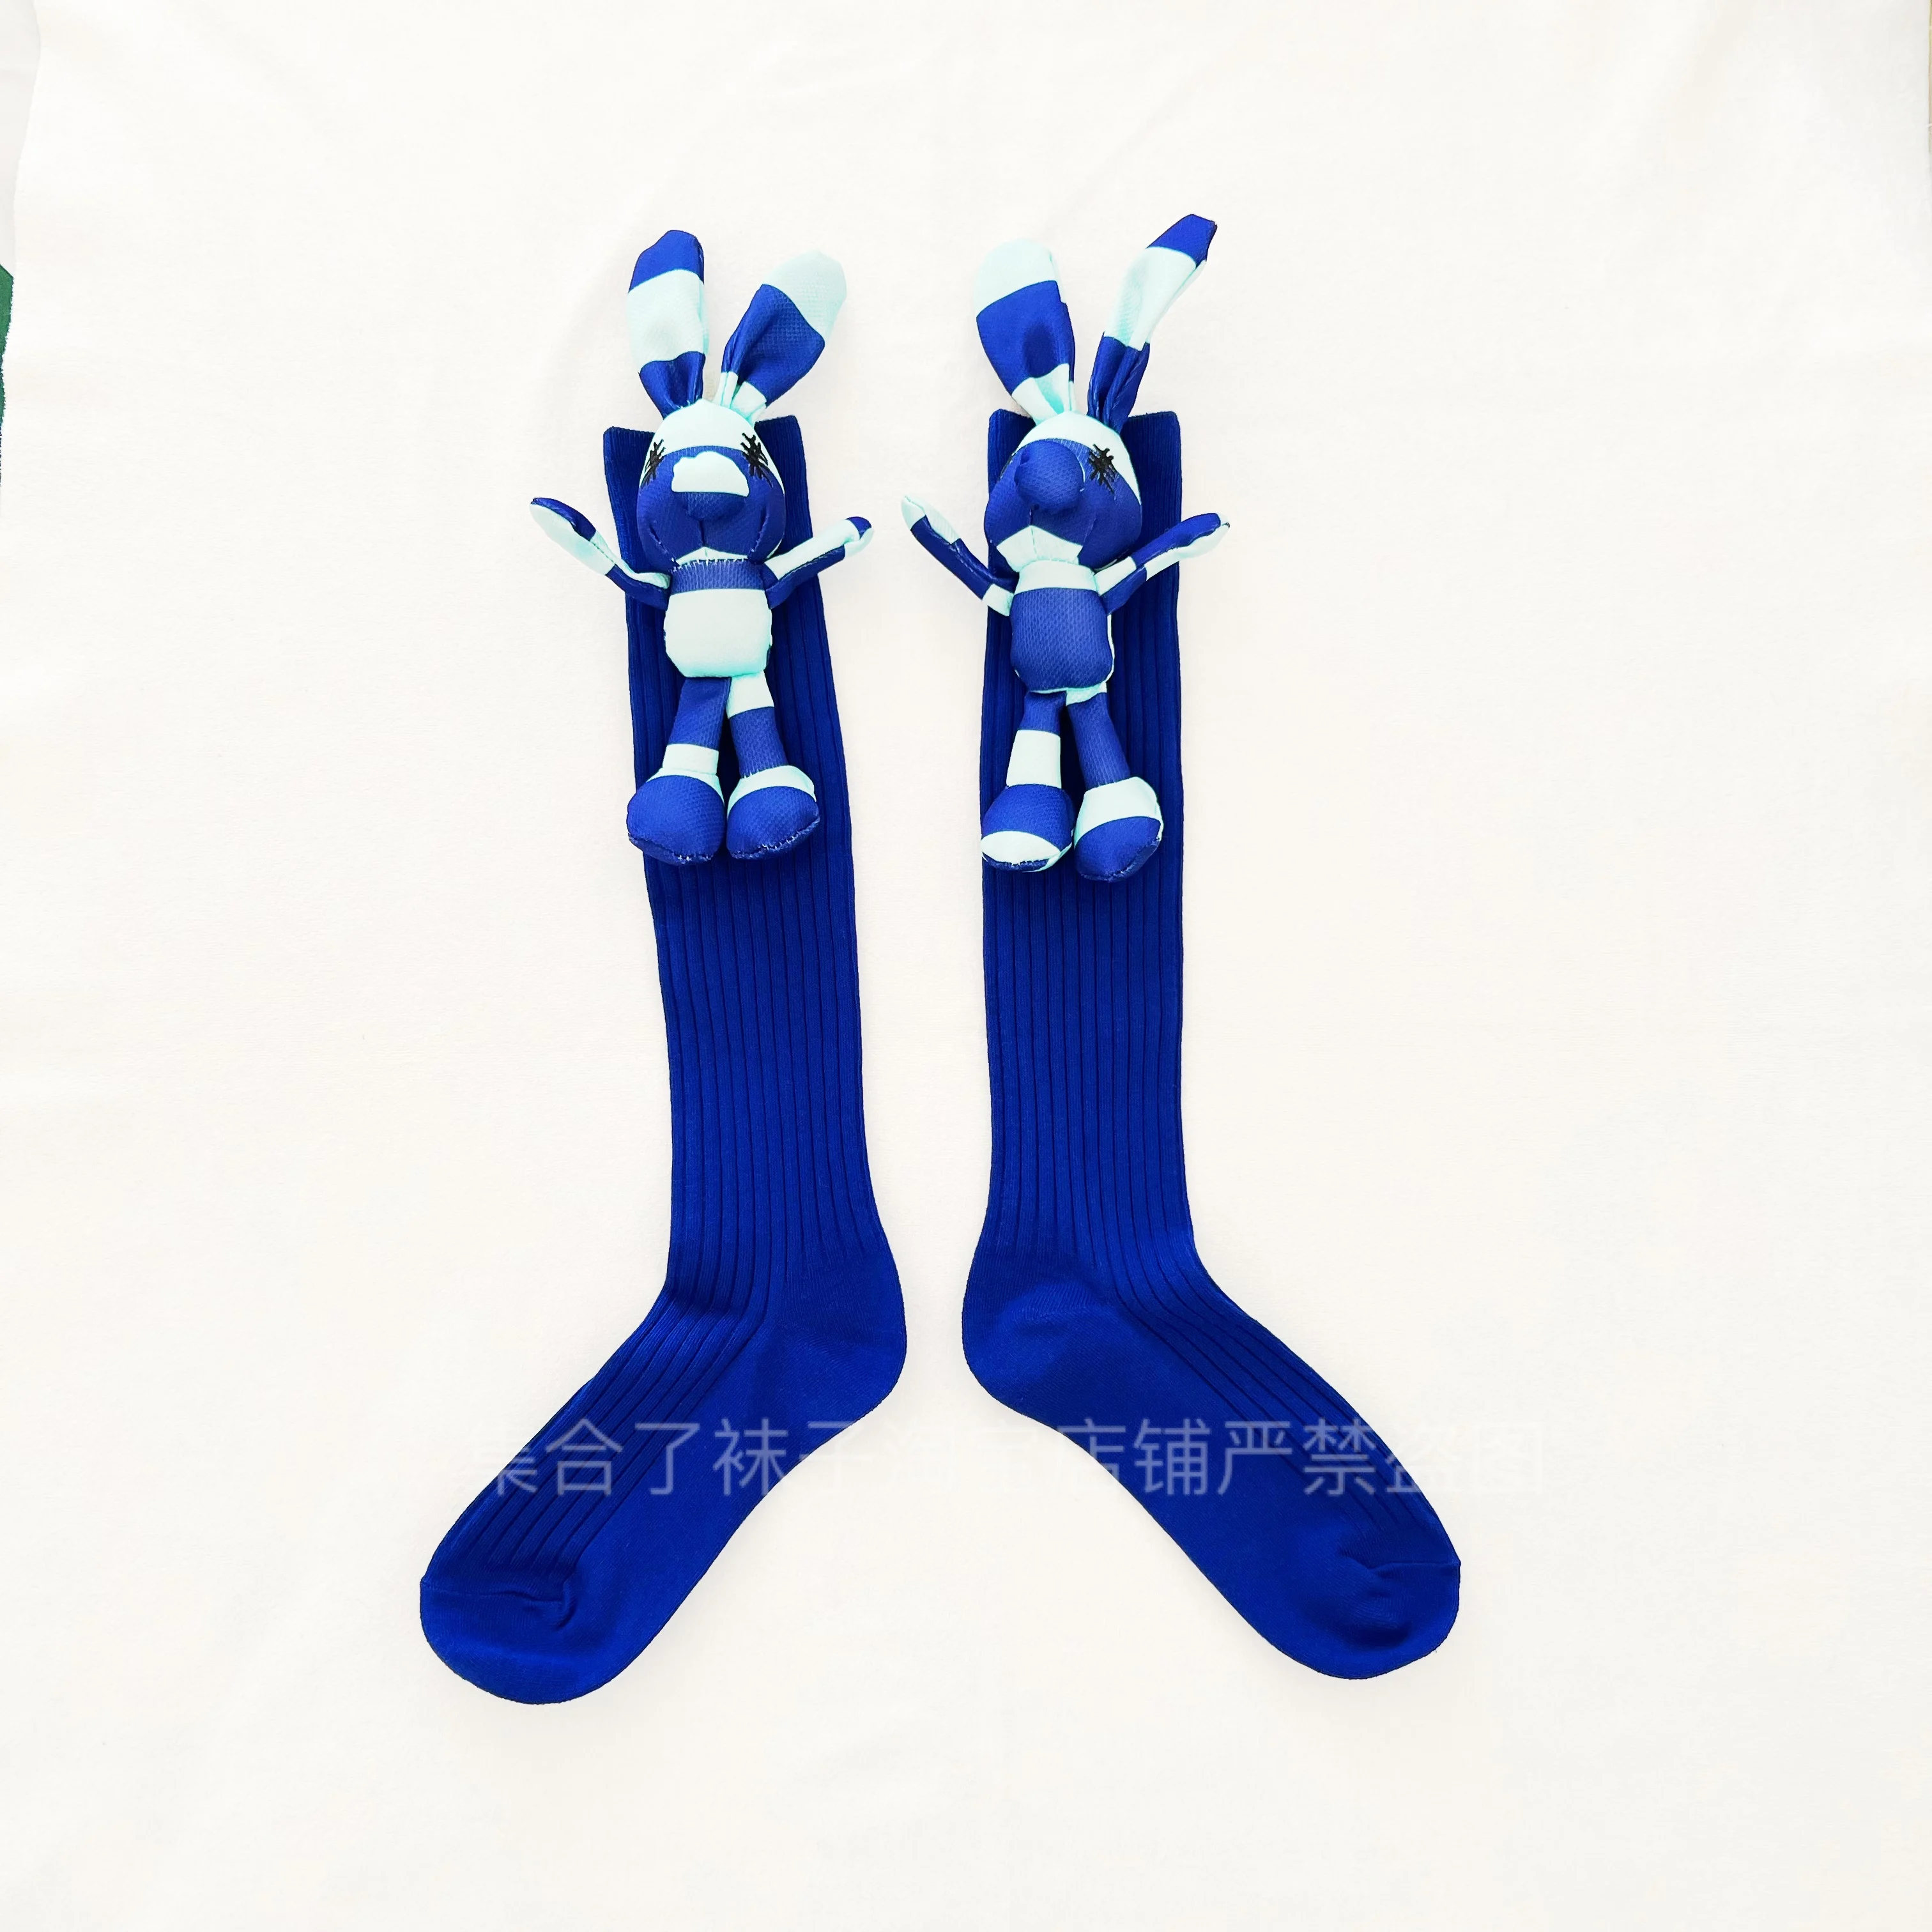 

Original Handwork Removable Doll Cute College Style High Tube JK Stockings Four Seasons Wear Candy Color Women Long Socks